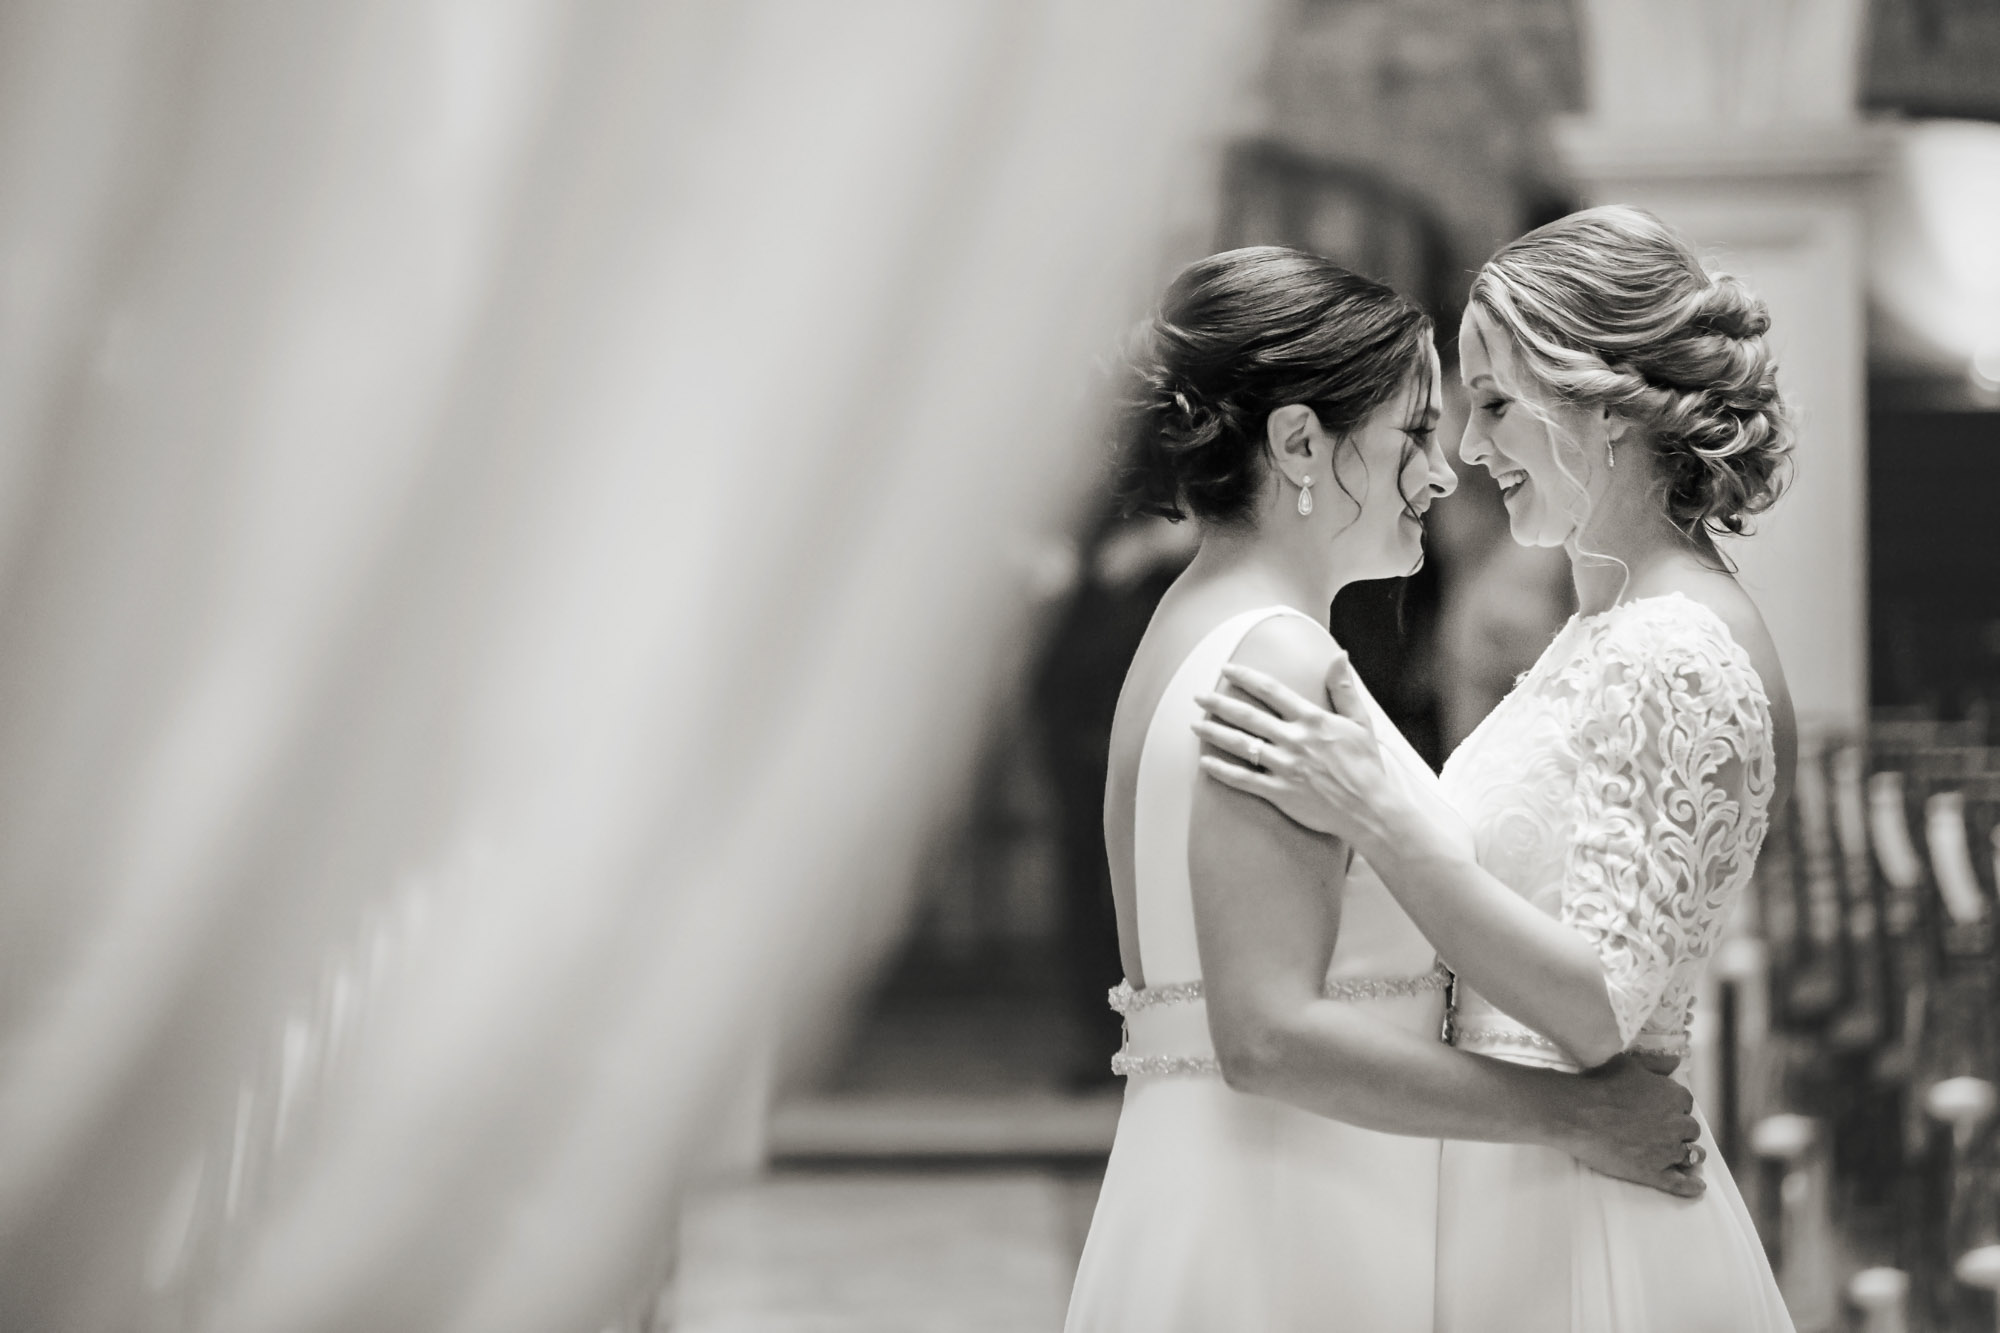 Love was in the air at this magical Canadian wedding | Van Daele & Russell Photography | Featured on Equally Wed, the leading LGBTQ+ wedding magazine